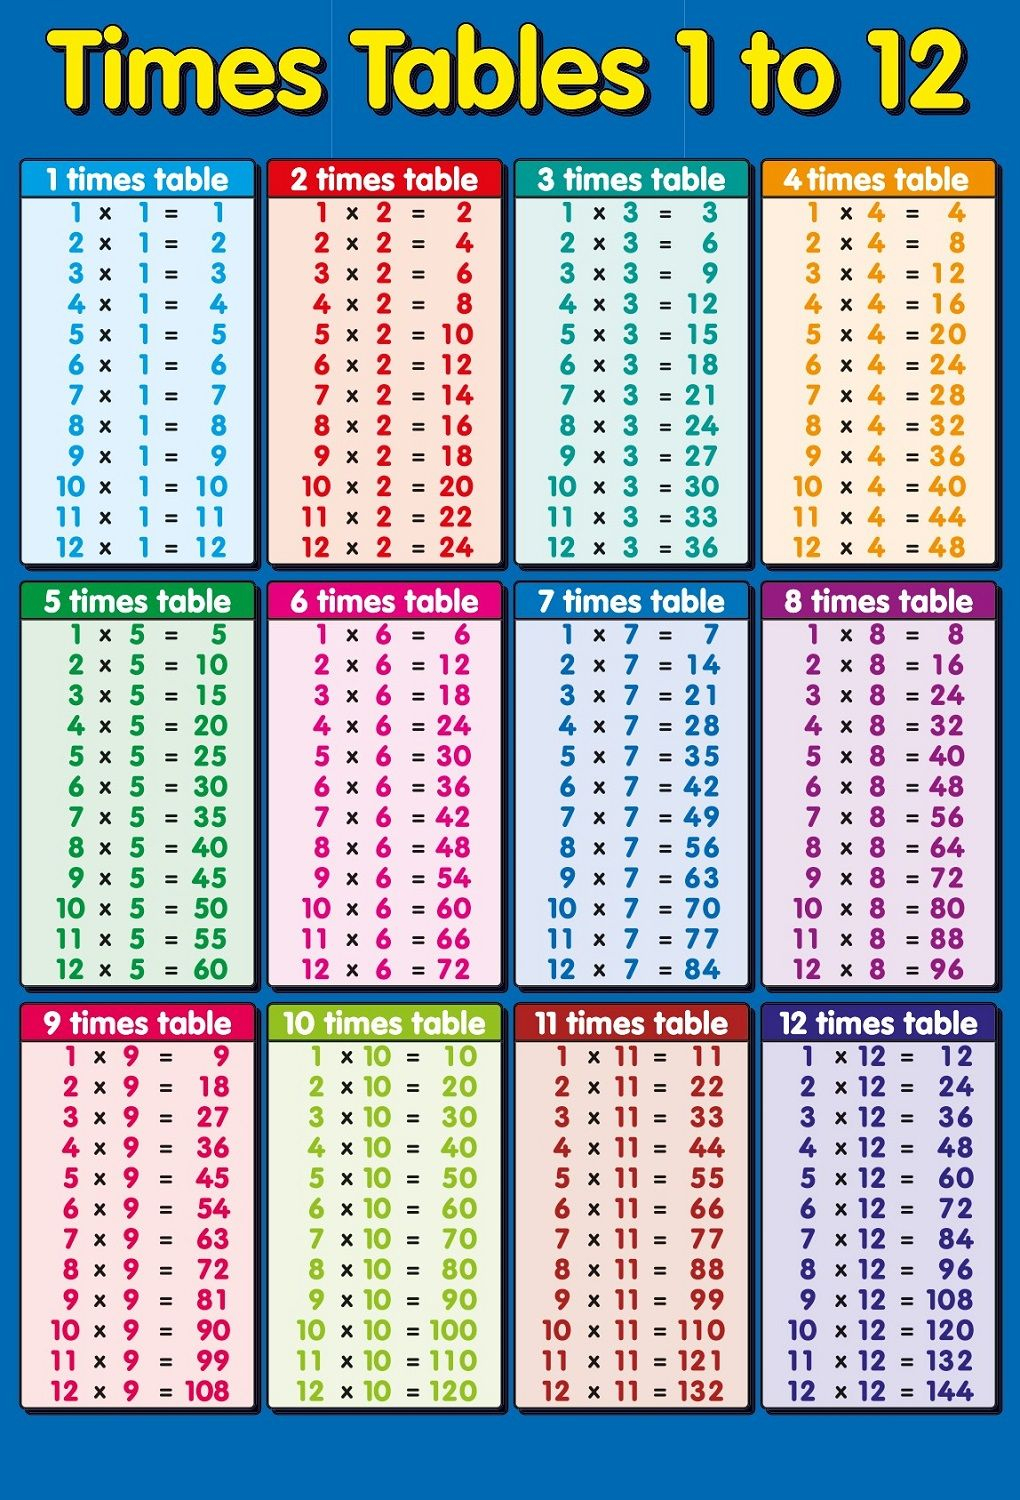 Times Table - 2-12 Worksheets - 1, 2, 3, 4, 5, 6, 7, 8, 9 ...